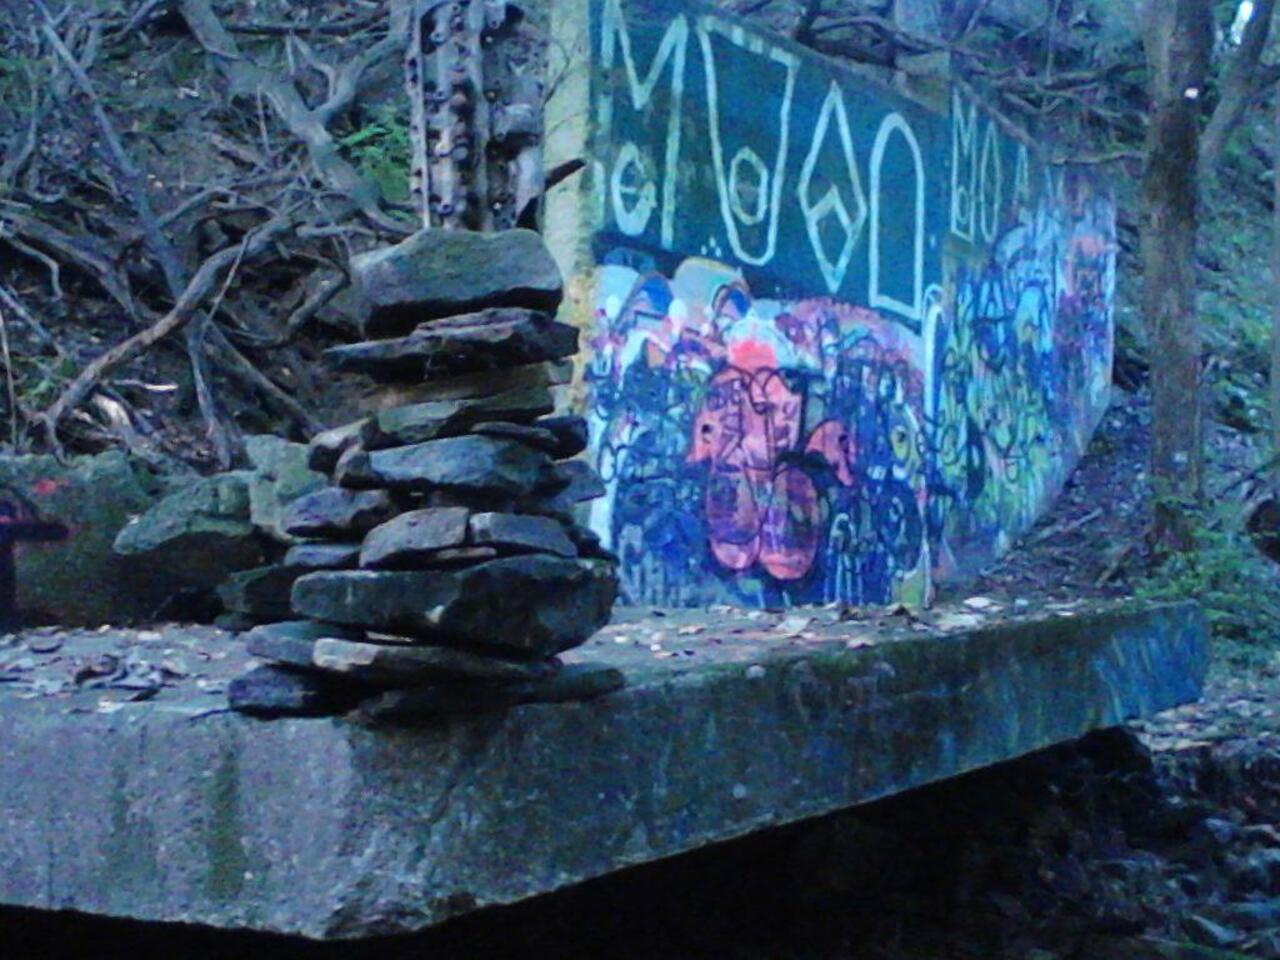 Another rock sculpture in the ravine. Artist unknown.  #art #nature #graffiti #GraffitiArtist  #rocks #stones #water http://t.co/cczfsWL1a8